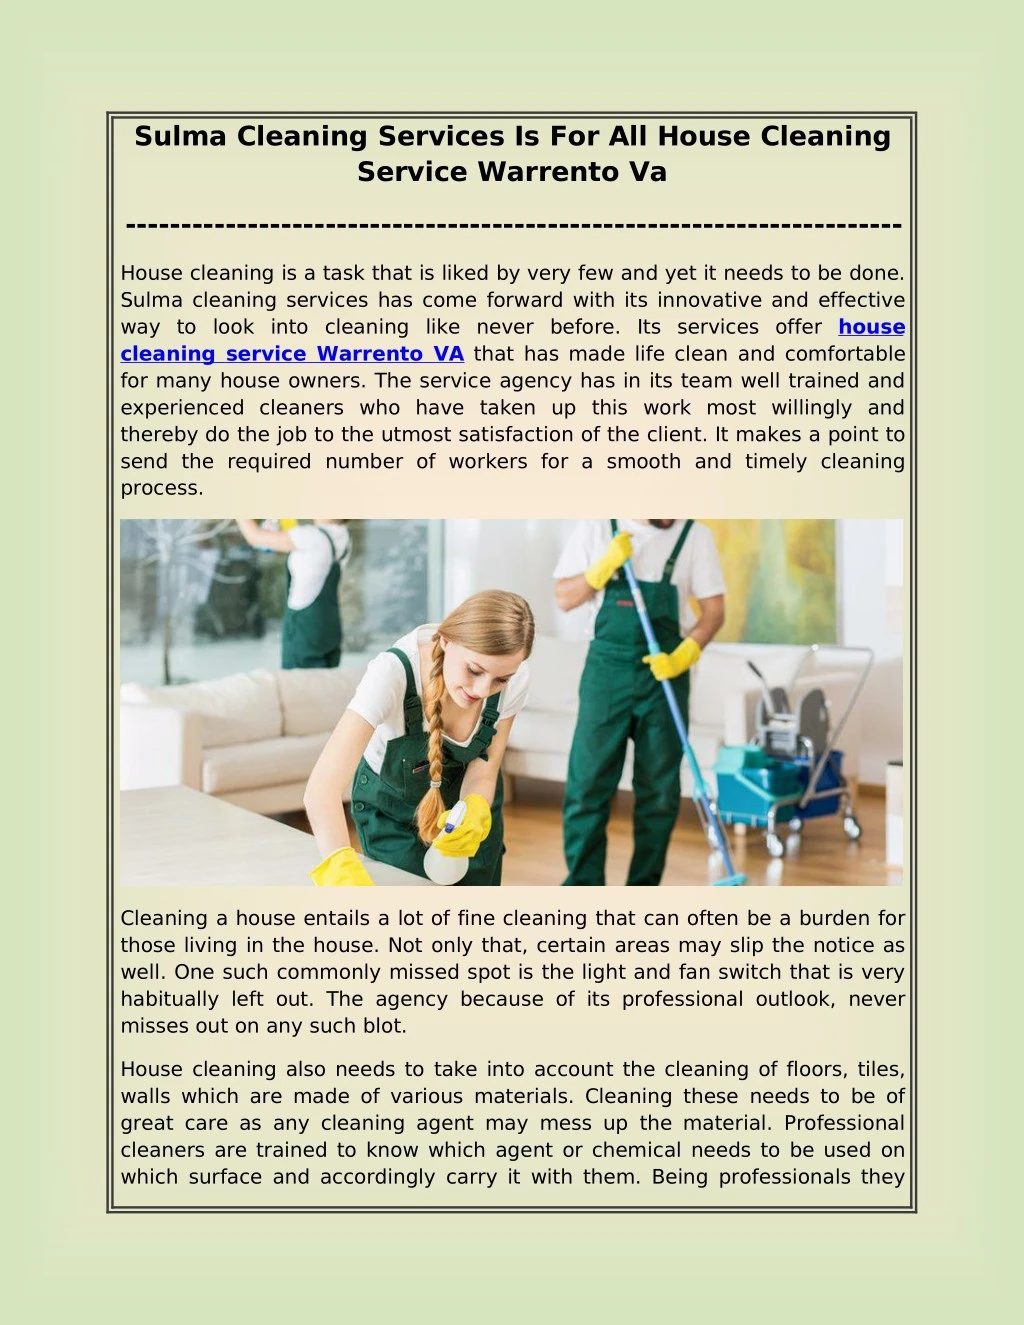 sulma cleaning services is for all house cleaning